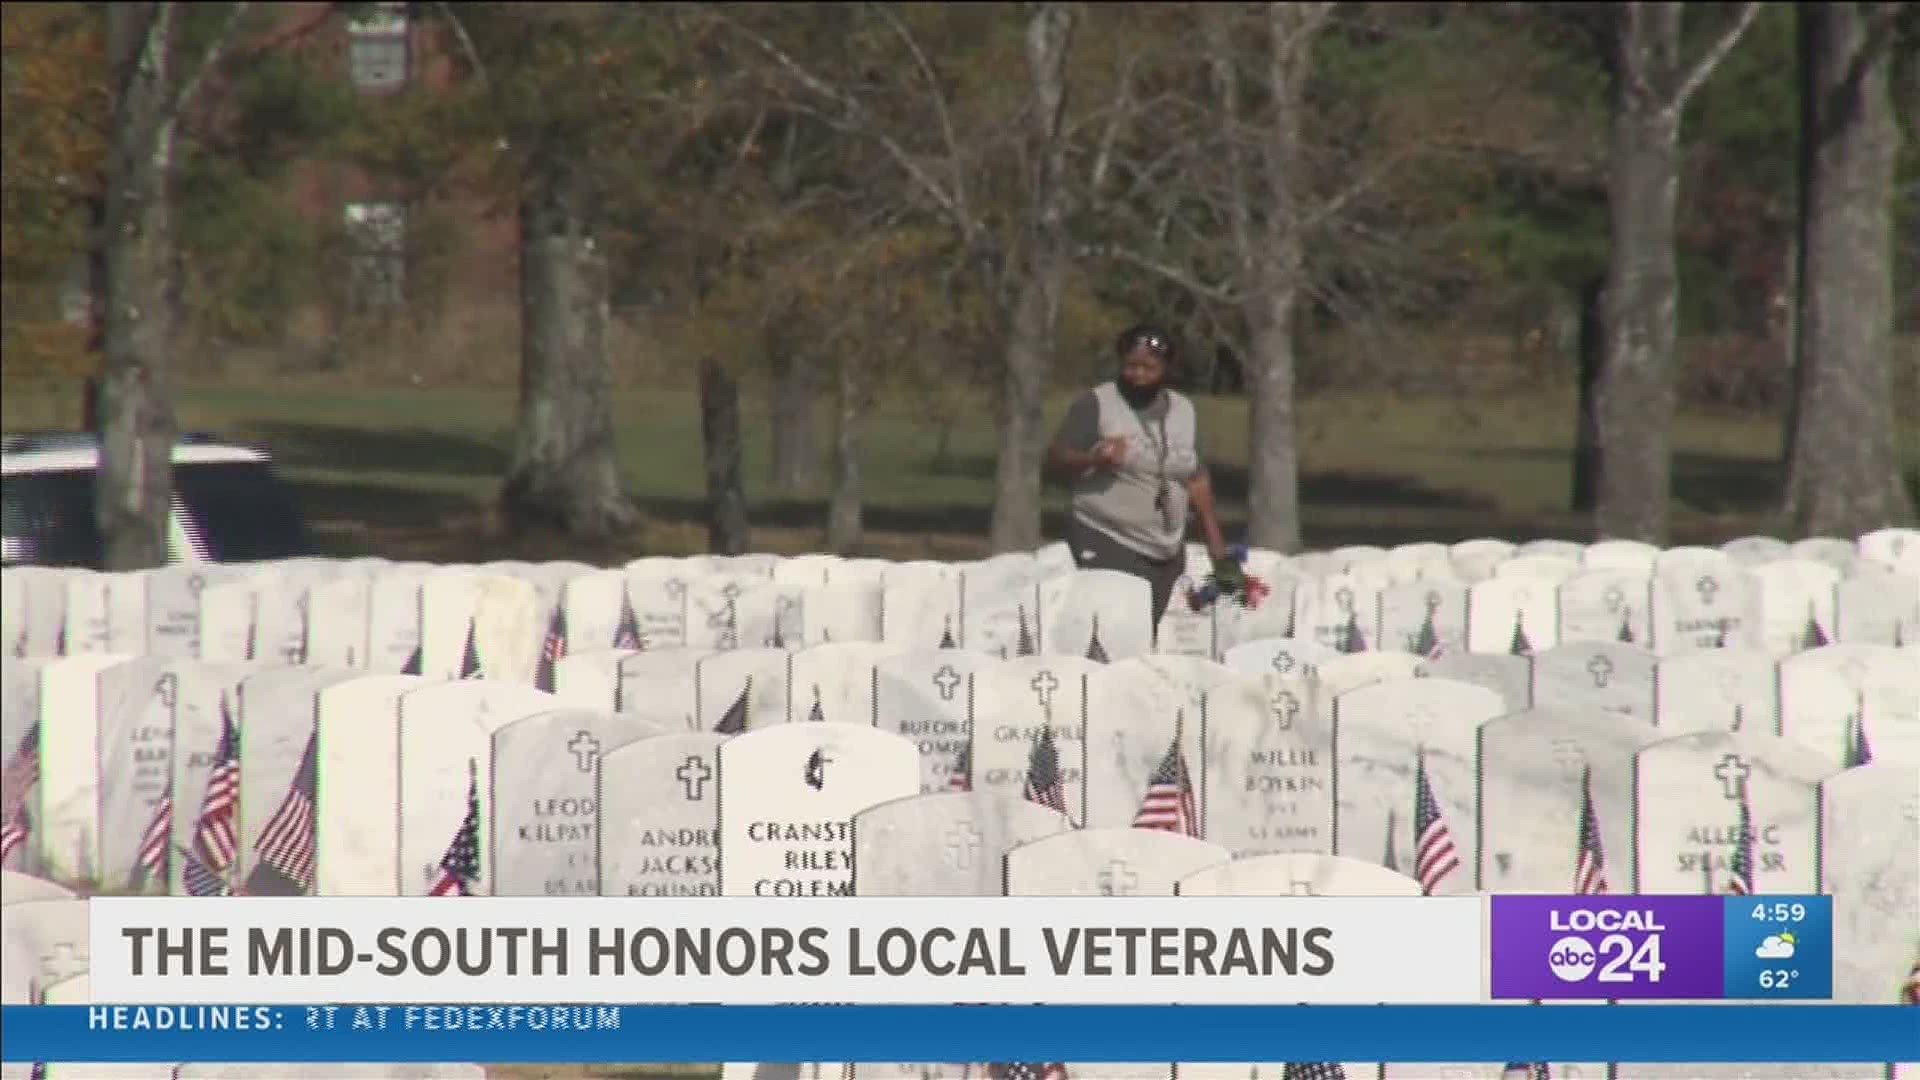 Across Shelby County, people paused Wednesday to honor and remember the men and women who served.